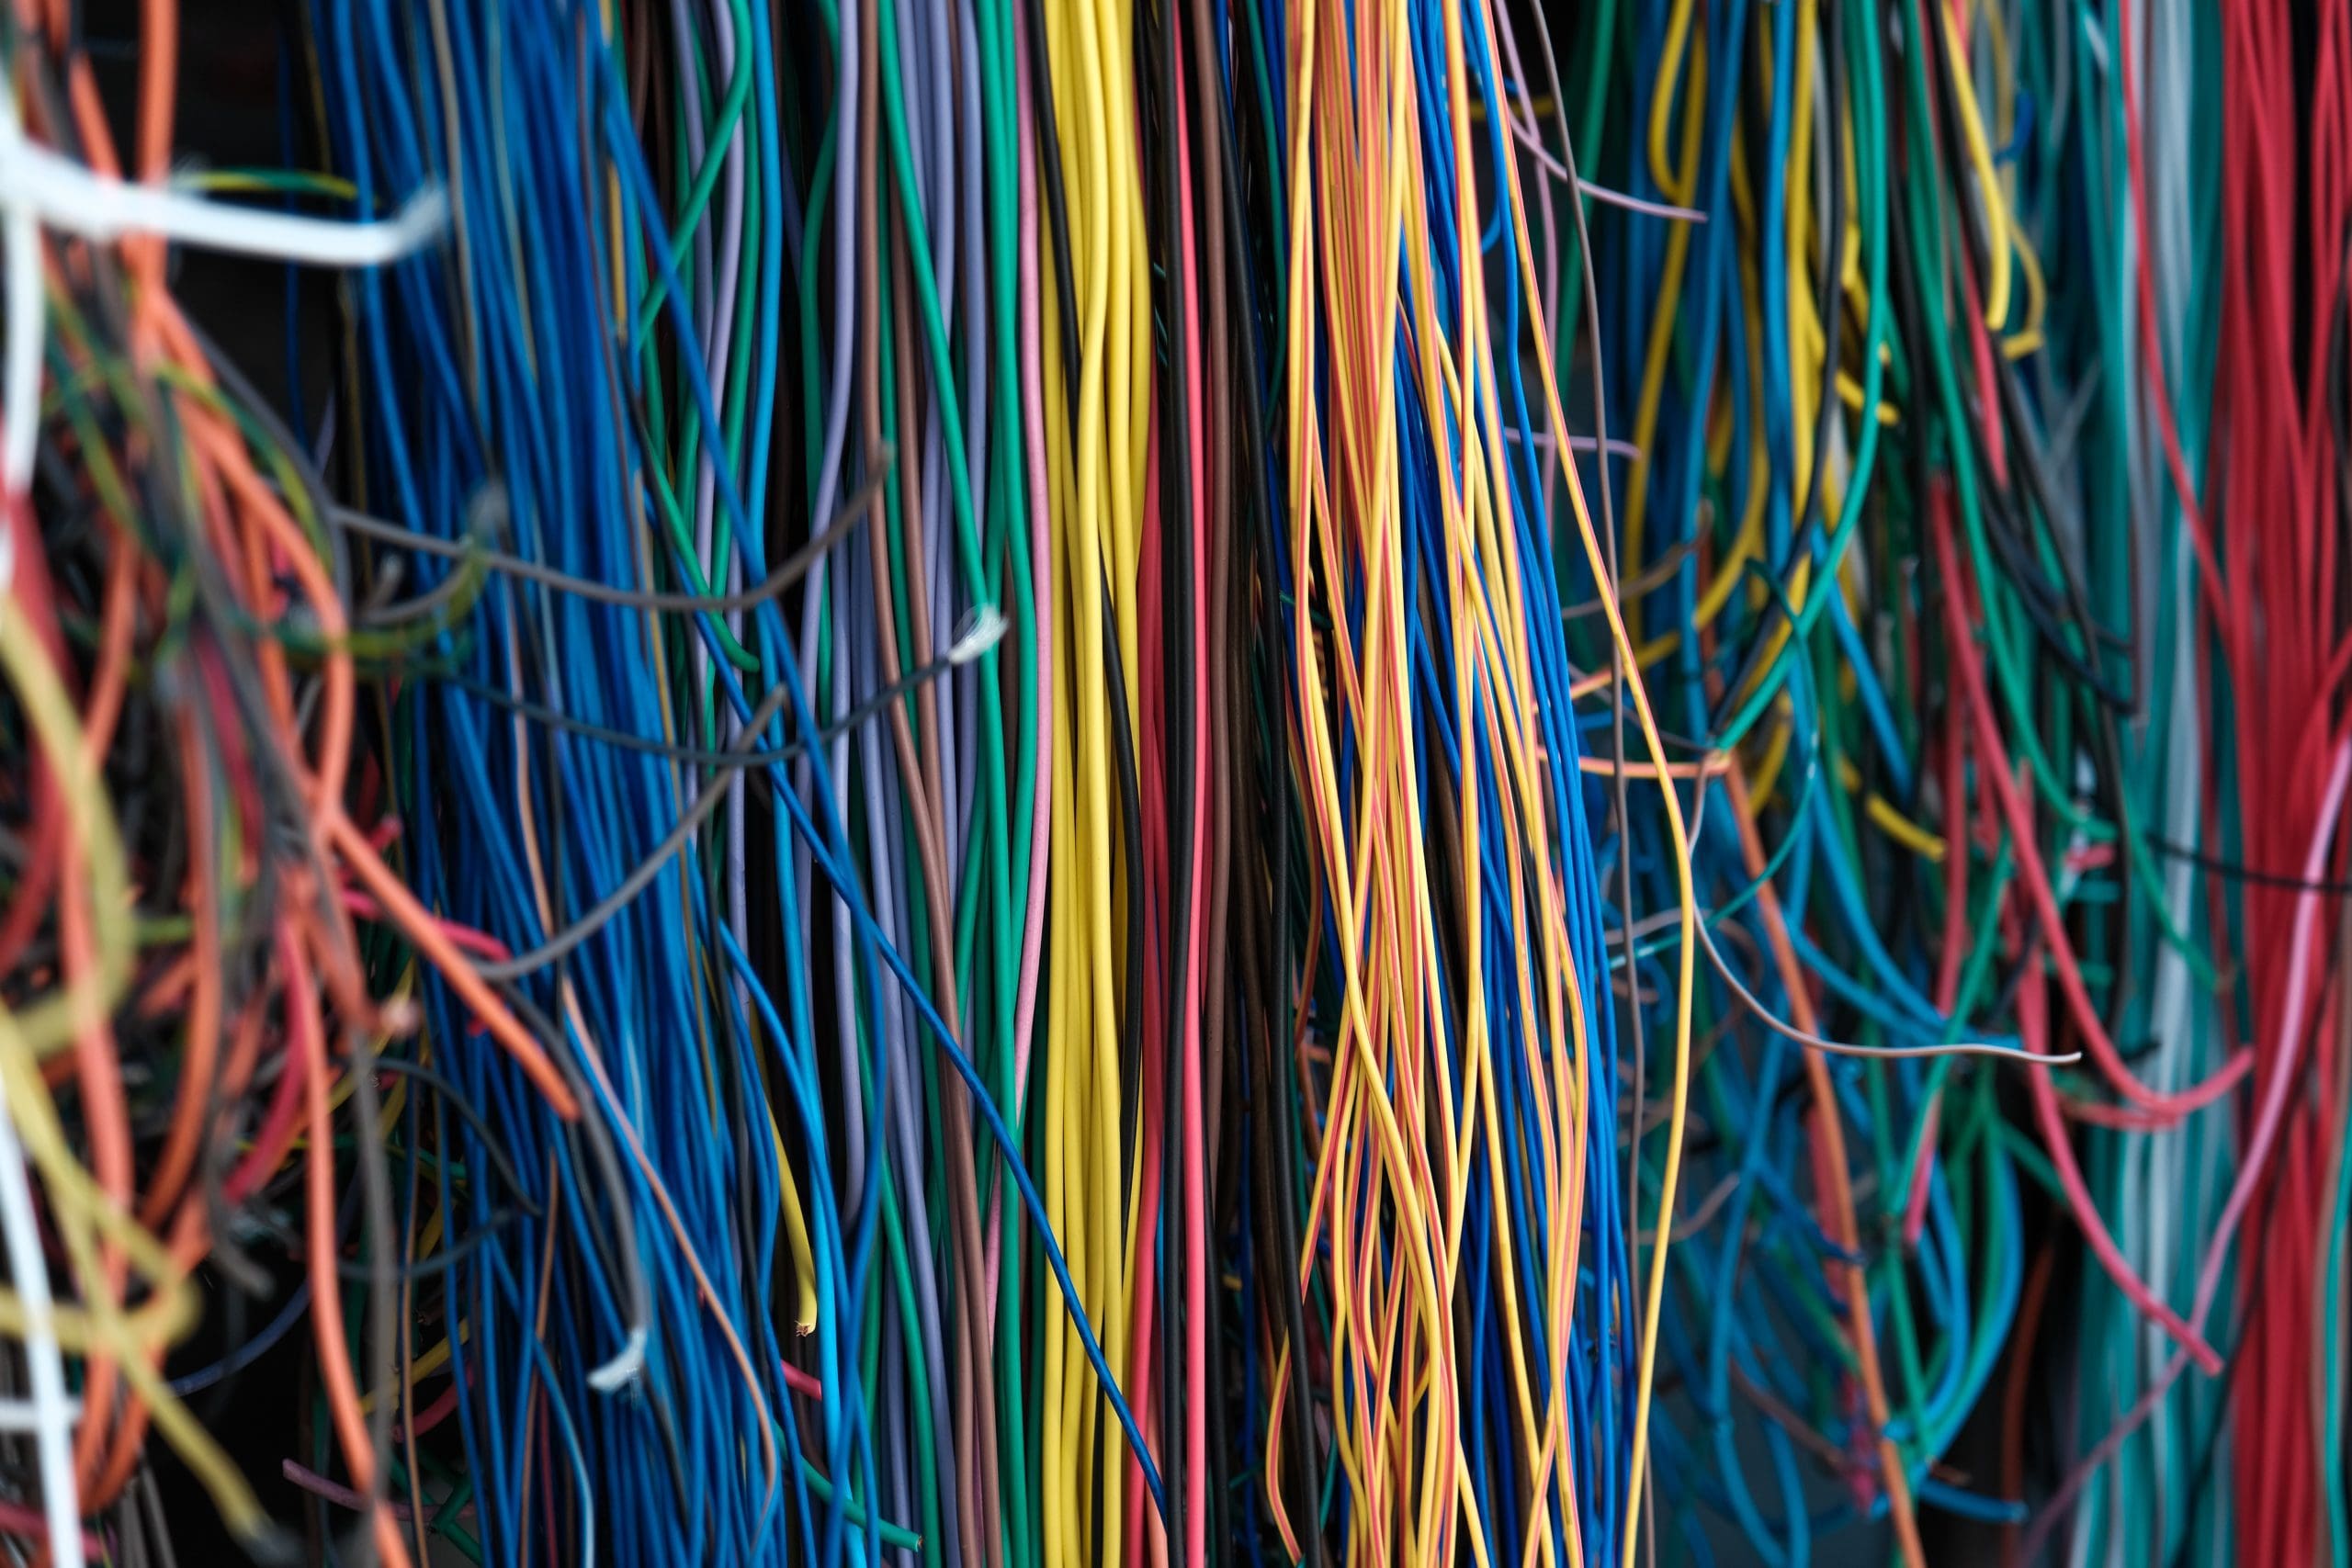 Abstract image of wires and network cables